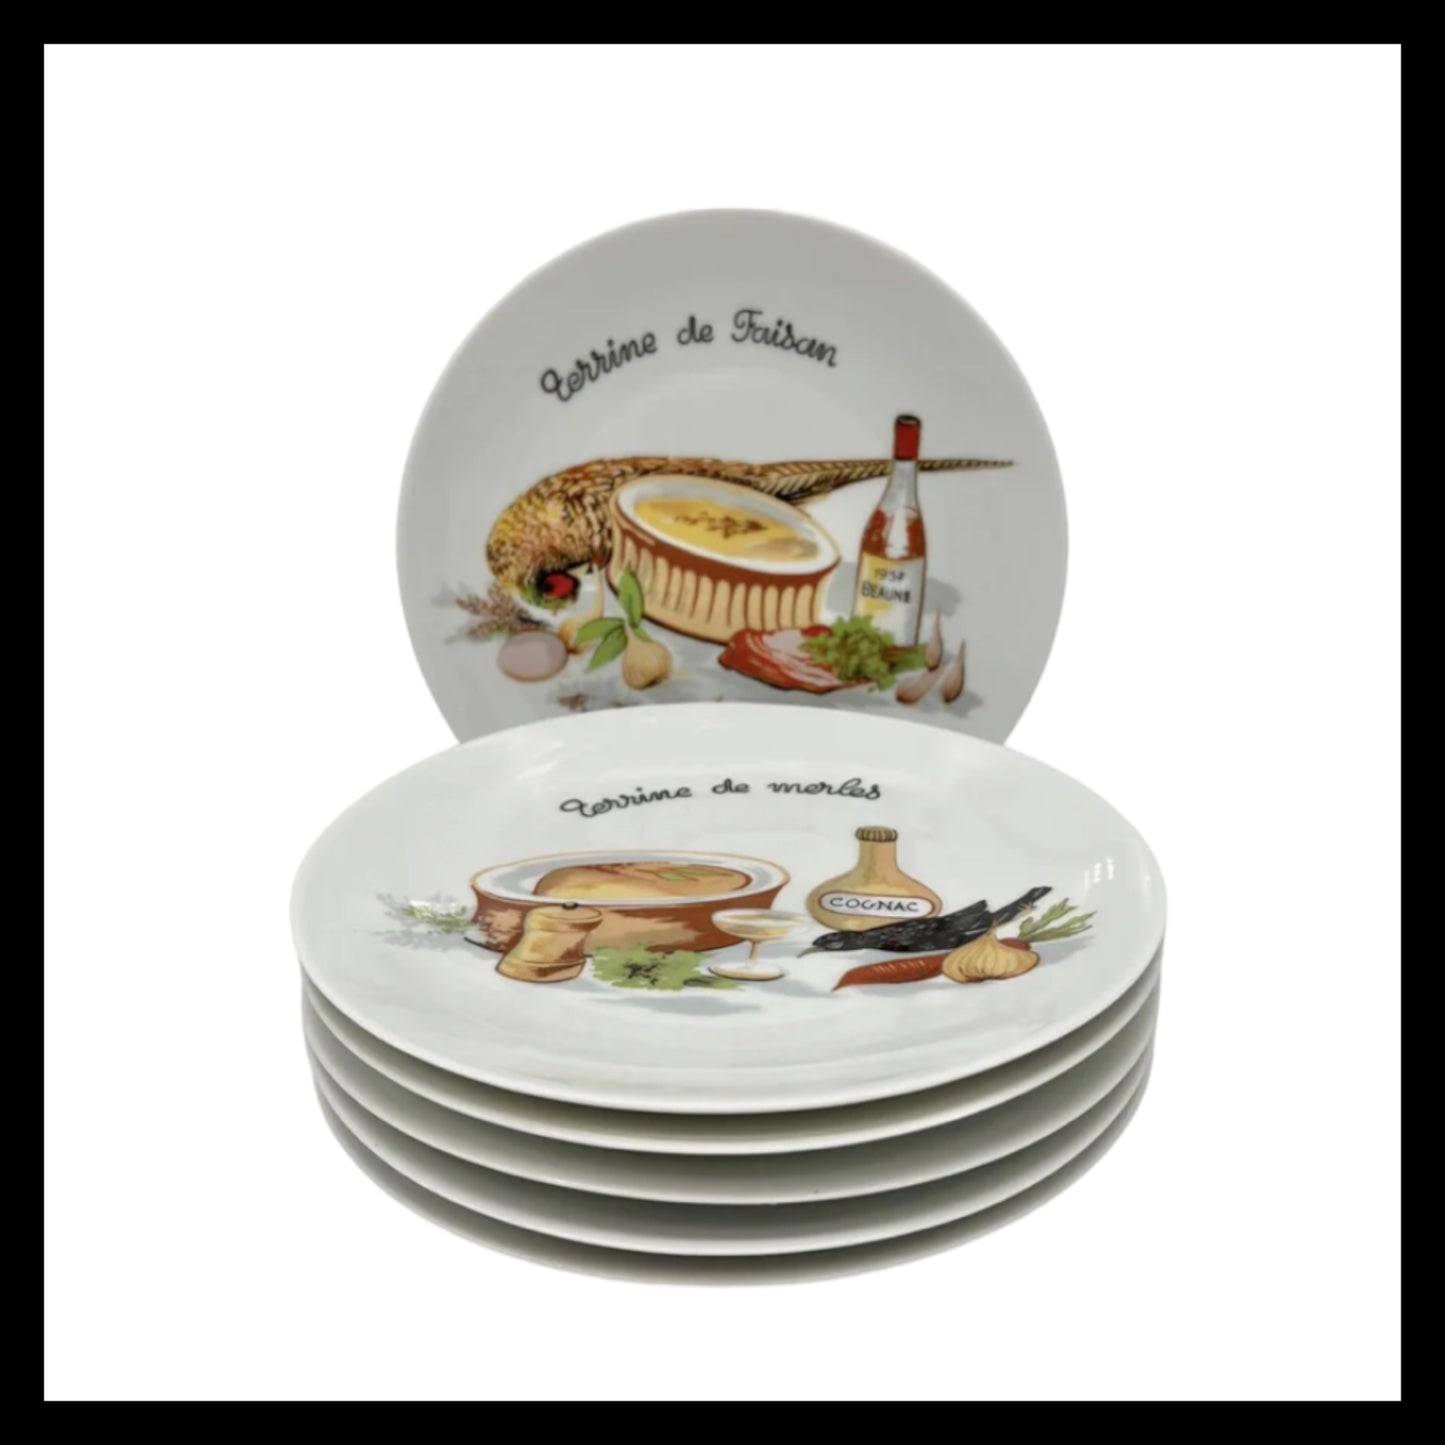 French Pate Plate Set, 6 Terrine Serving Plates, Shabby Chic Tableware (C1)